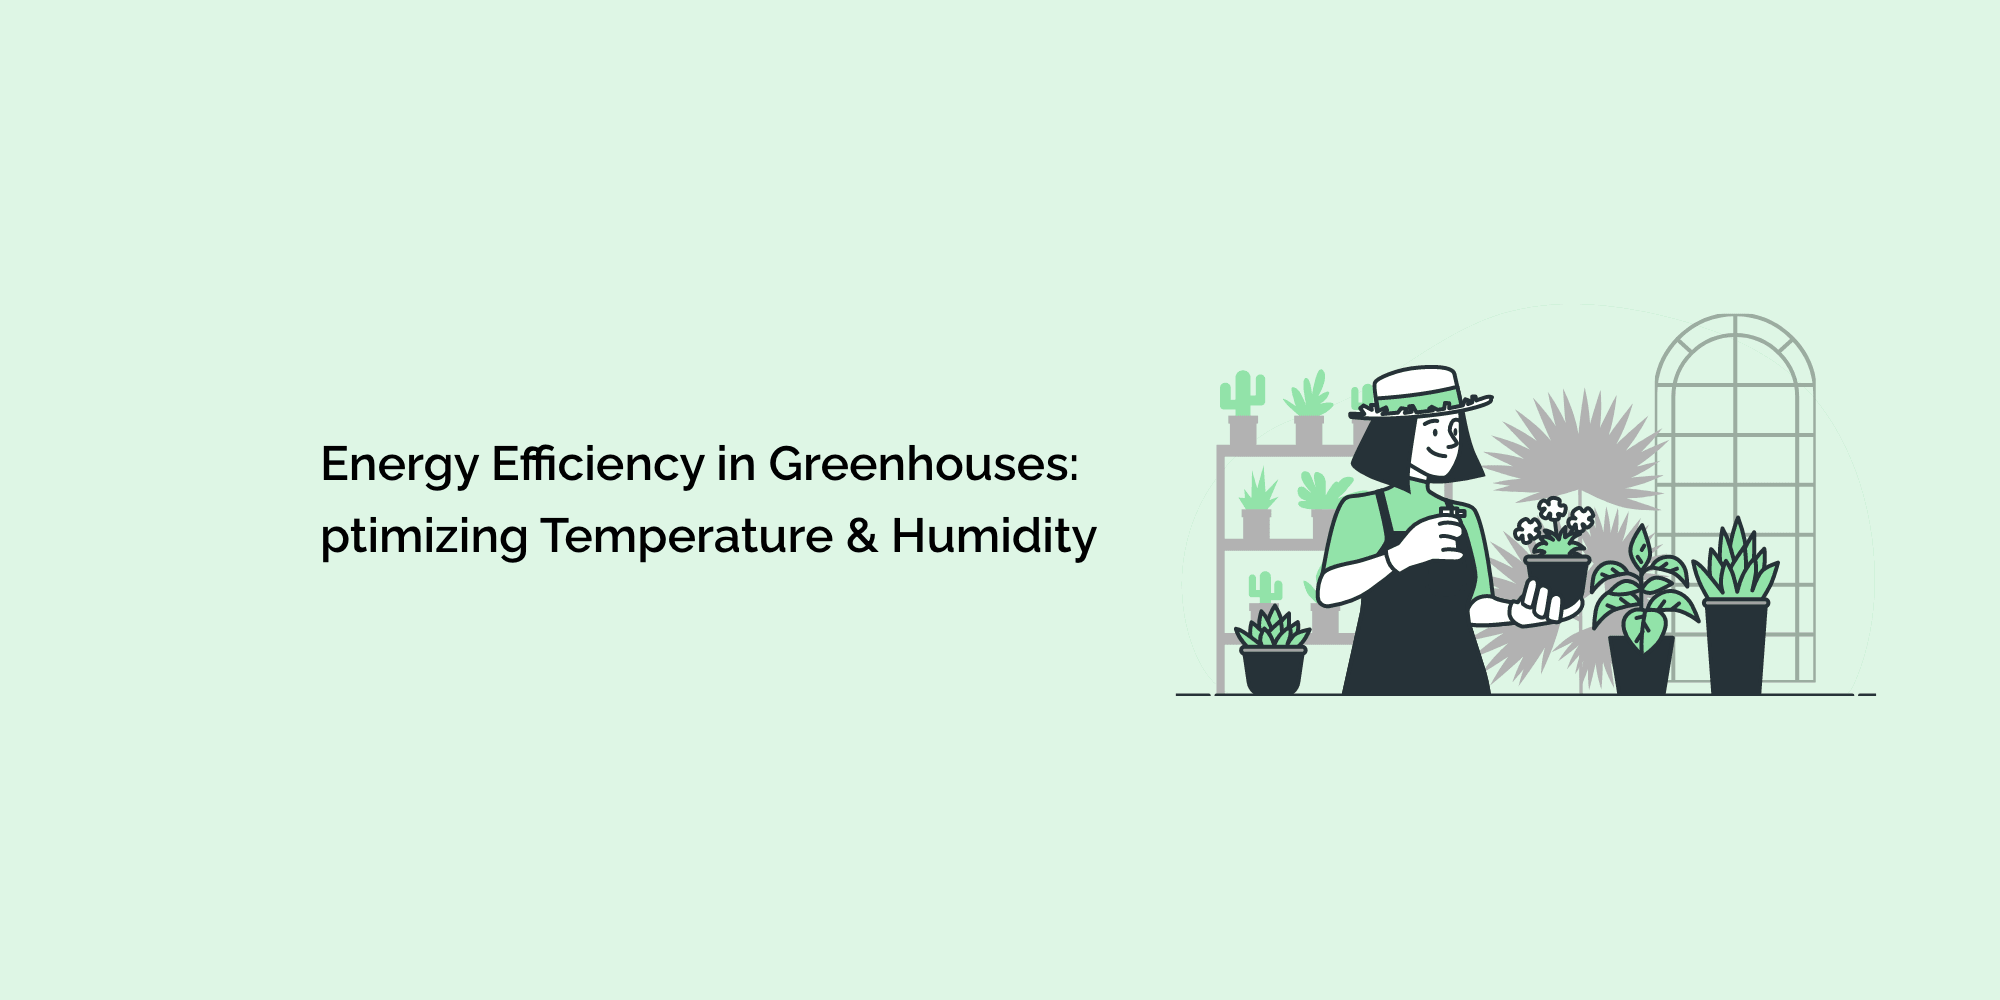 Energy Efficiency in Greenhouses: Optimizing Temperature and Humidity